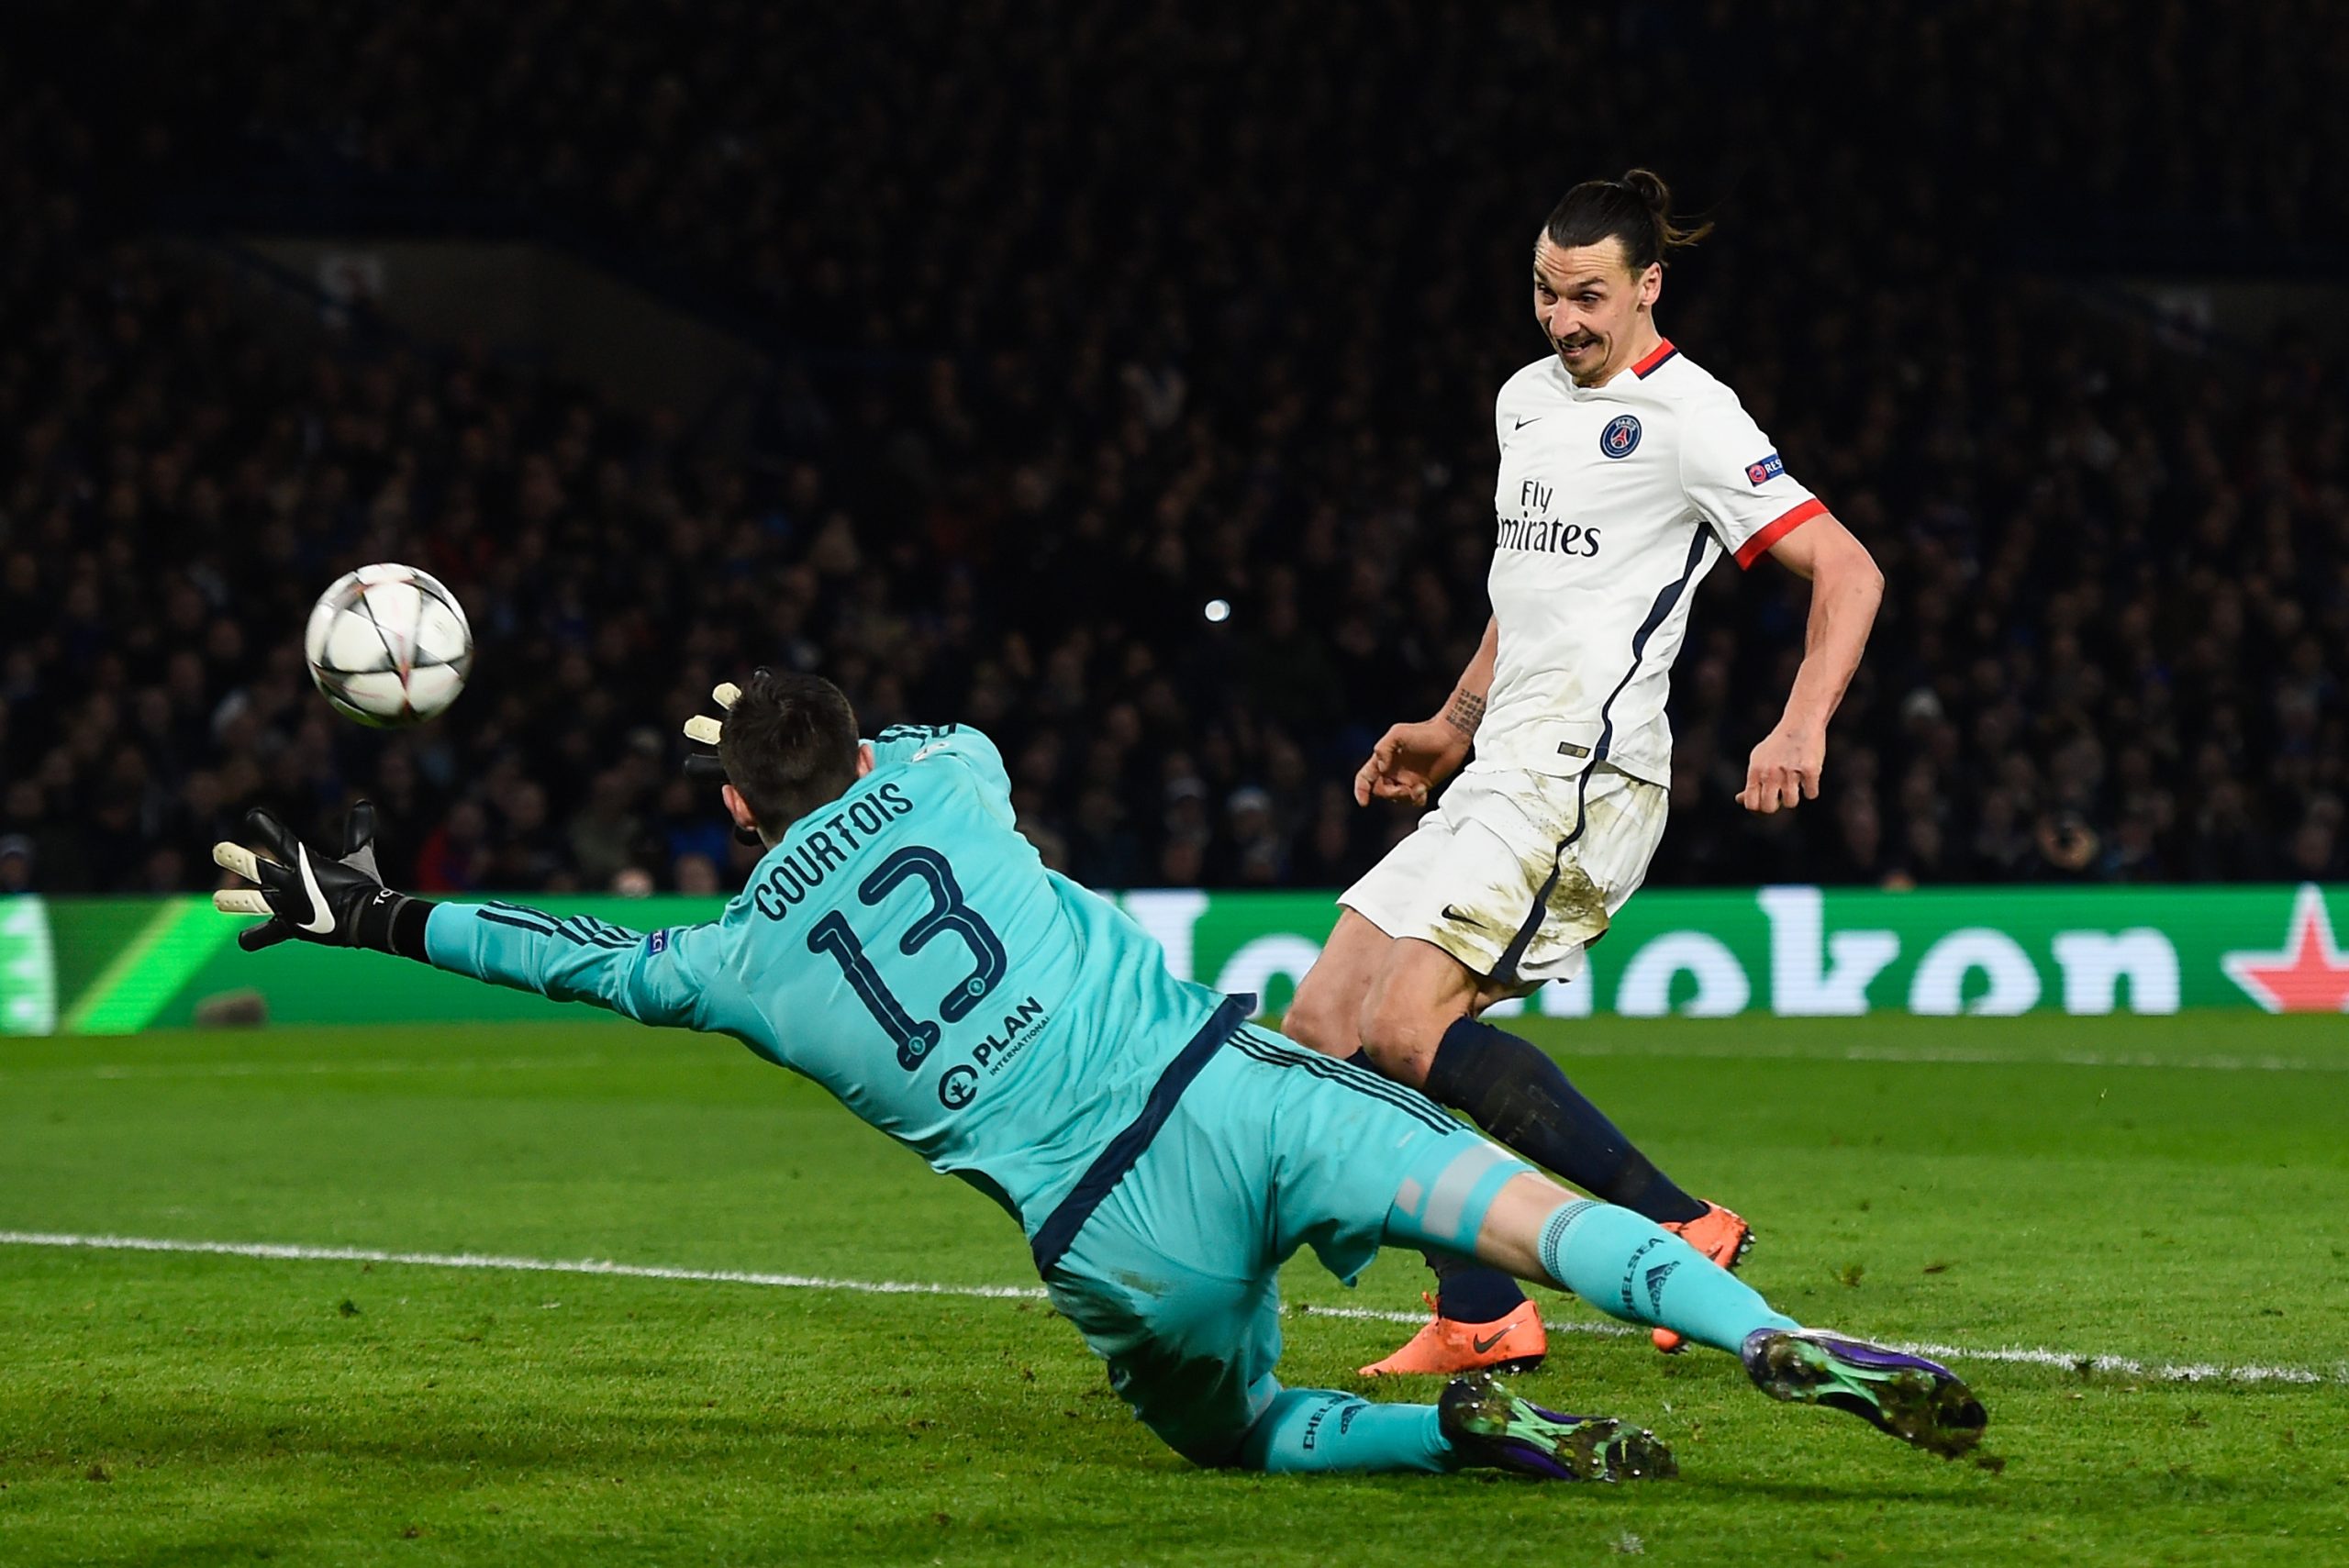 Zlatan Ibrahimovic of PSG scores his team's second goal past goalkeeper Thibaut Courtois of Chelsea - March 2016.